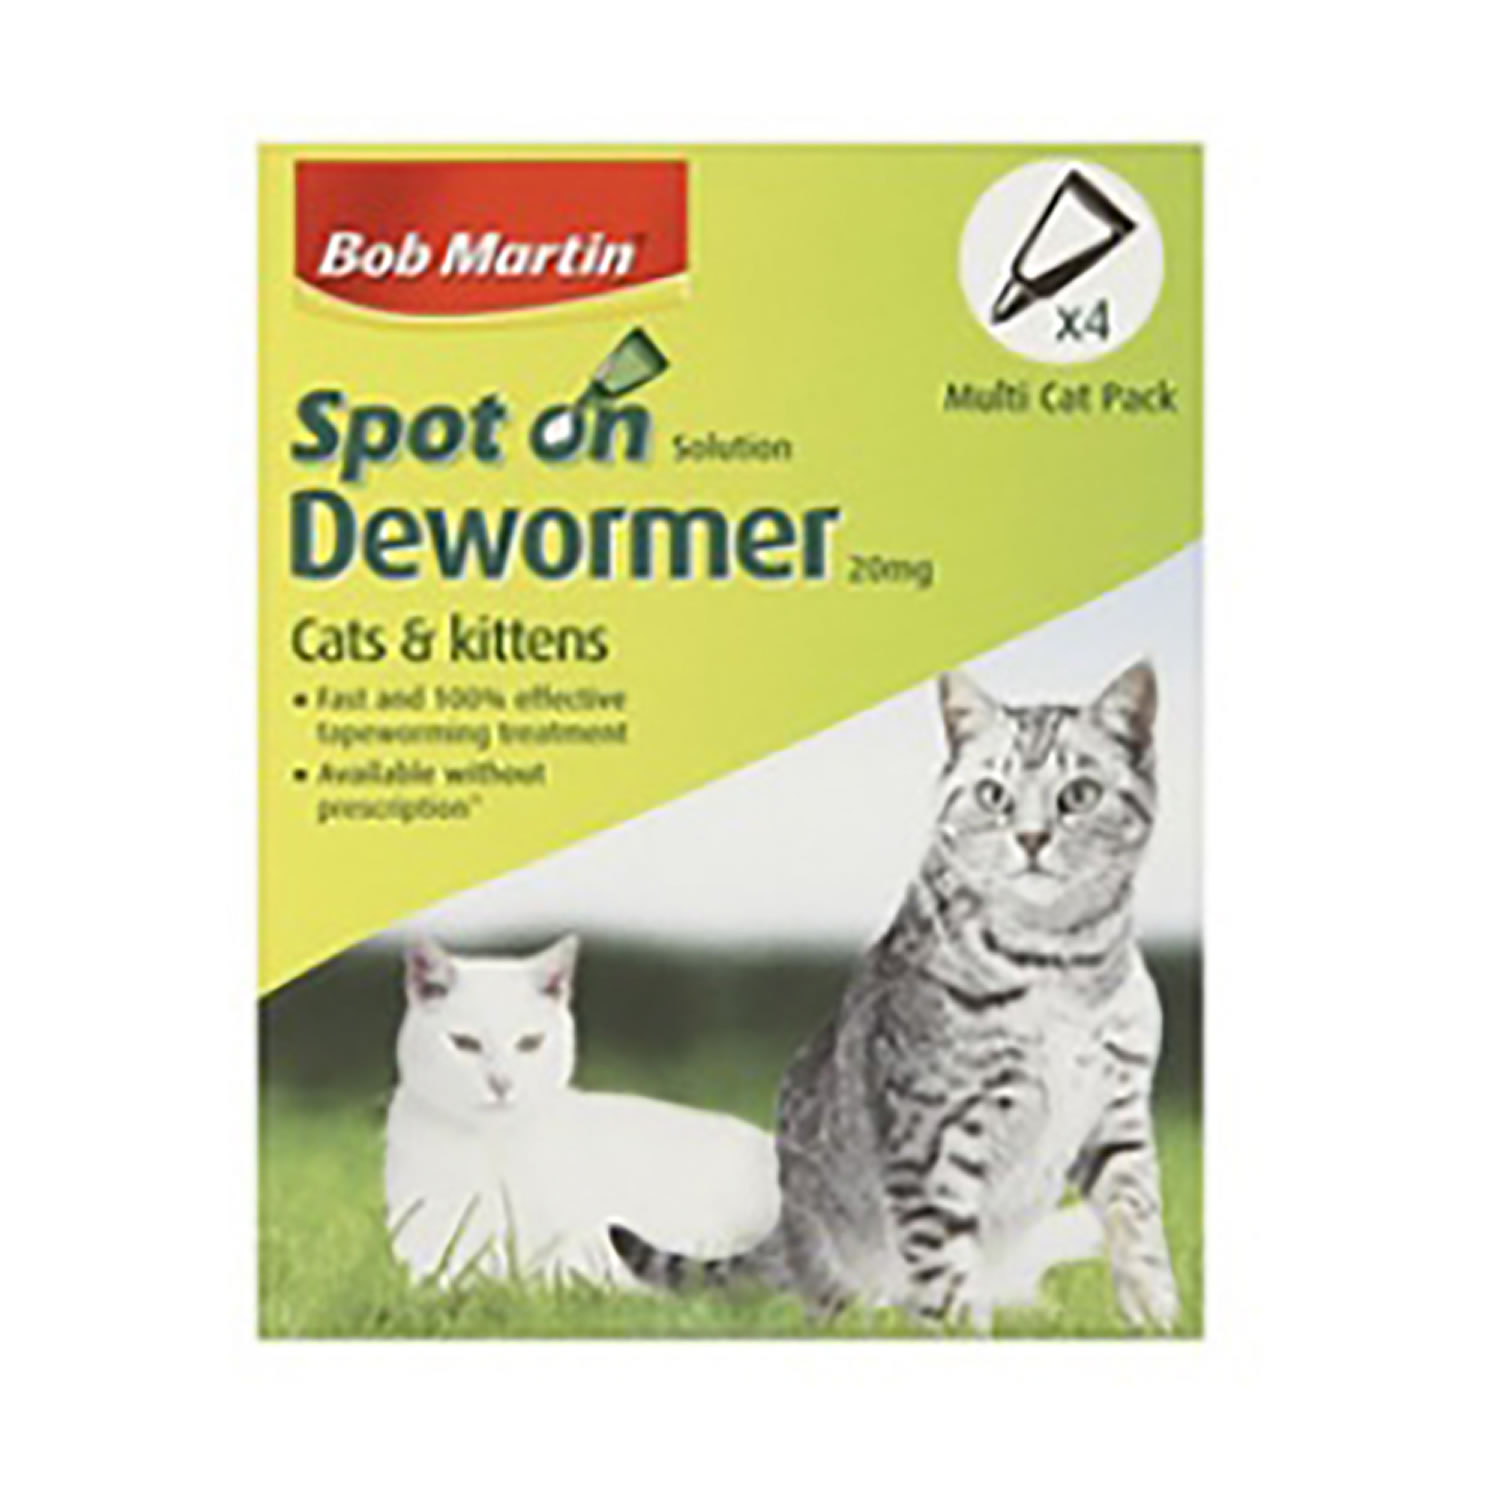 BOB MARTIN CLEAR SPOT ON WORMER FOR CATS & KITTENS BOB MARTIN CLEAR SPOT ON WORMER FOR CATS & KITTENS 4 PIPETTES  4 PIPETTES